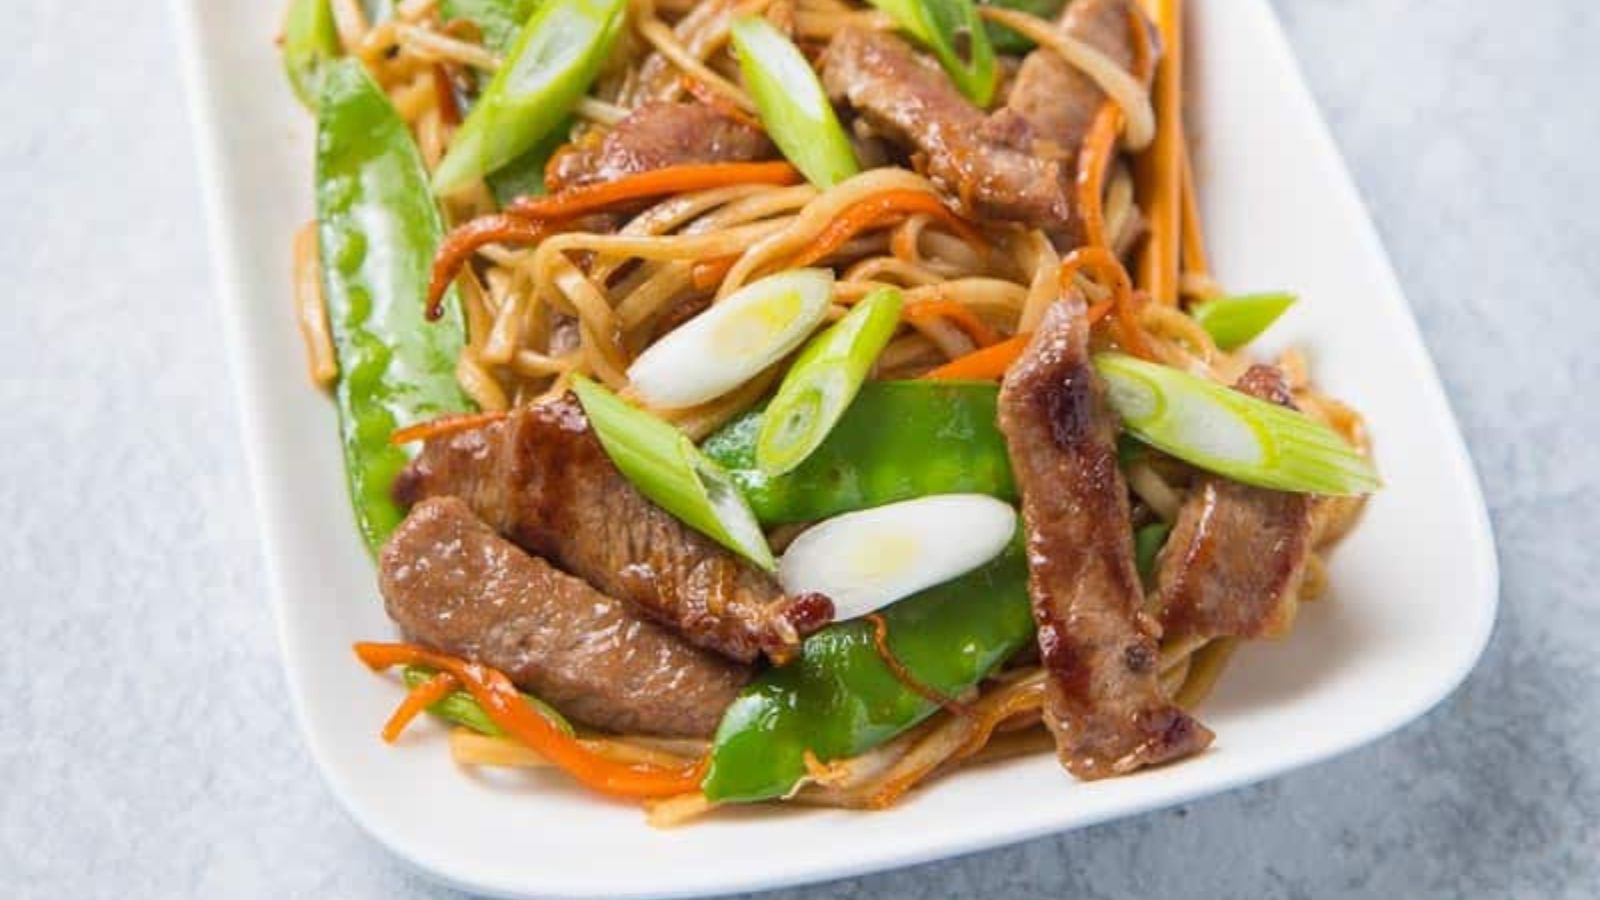 <p>Beef chow mein is the perfect quick meal that you can prepare in no time after a busy day. It is a handy dish for using whatever vegetables you happen to have leftover in the fridge.</p><p><strong>Recipe: <a href="https://www.greedygourmet.com/recipes-by-course/main-course/beef-chow-mein/">beef chow mein</a></strong></p>